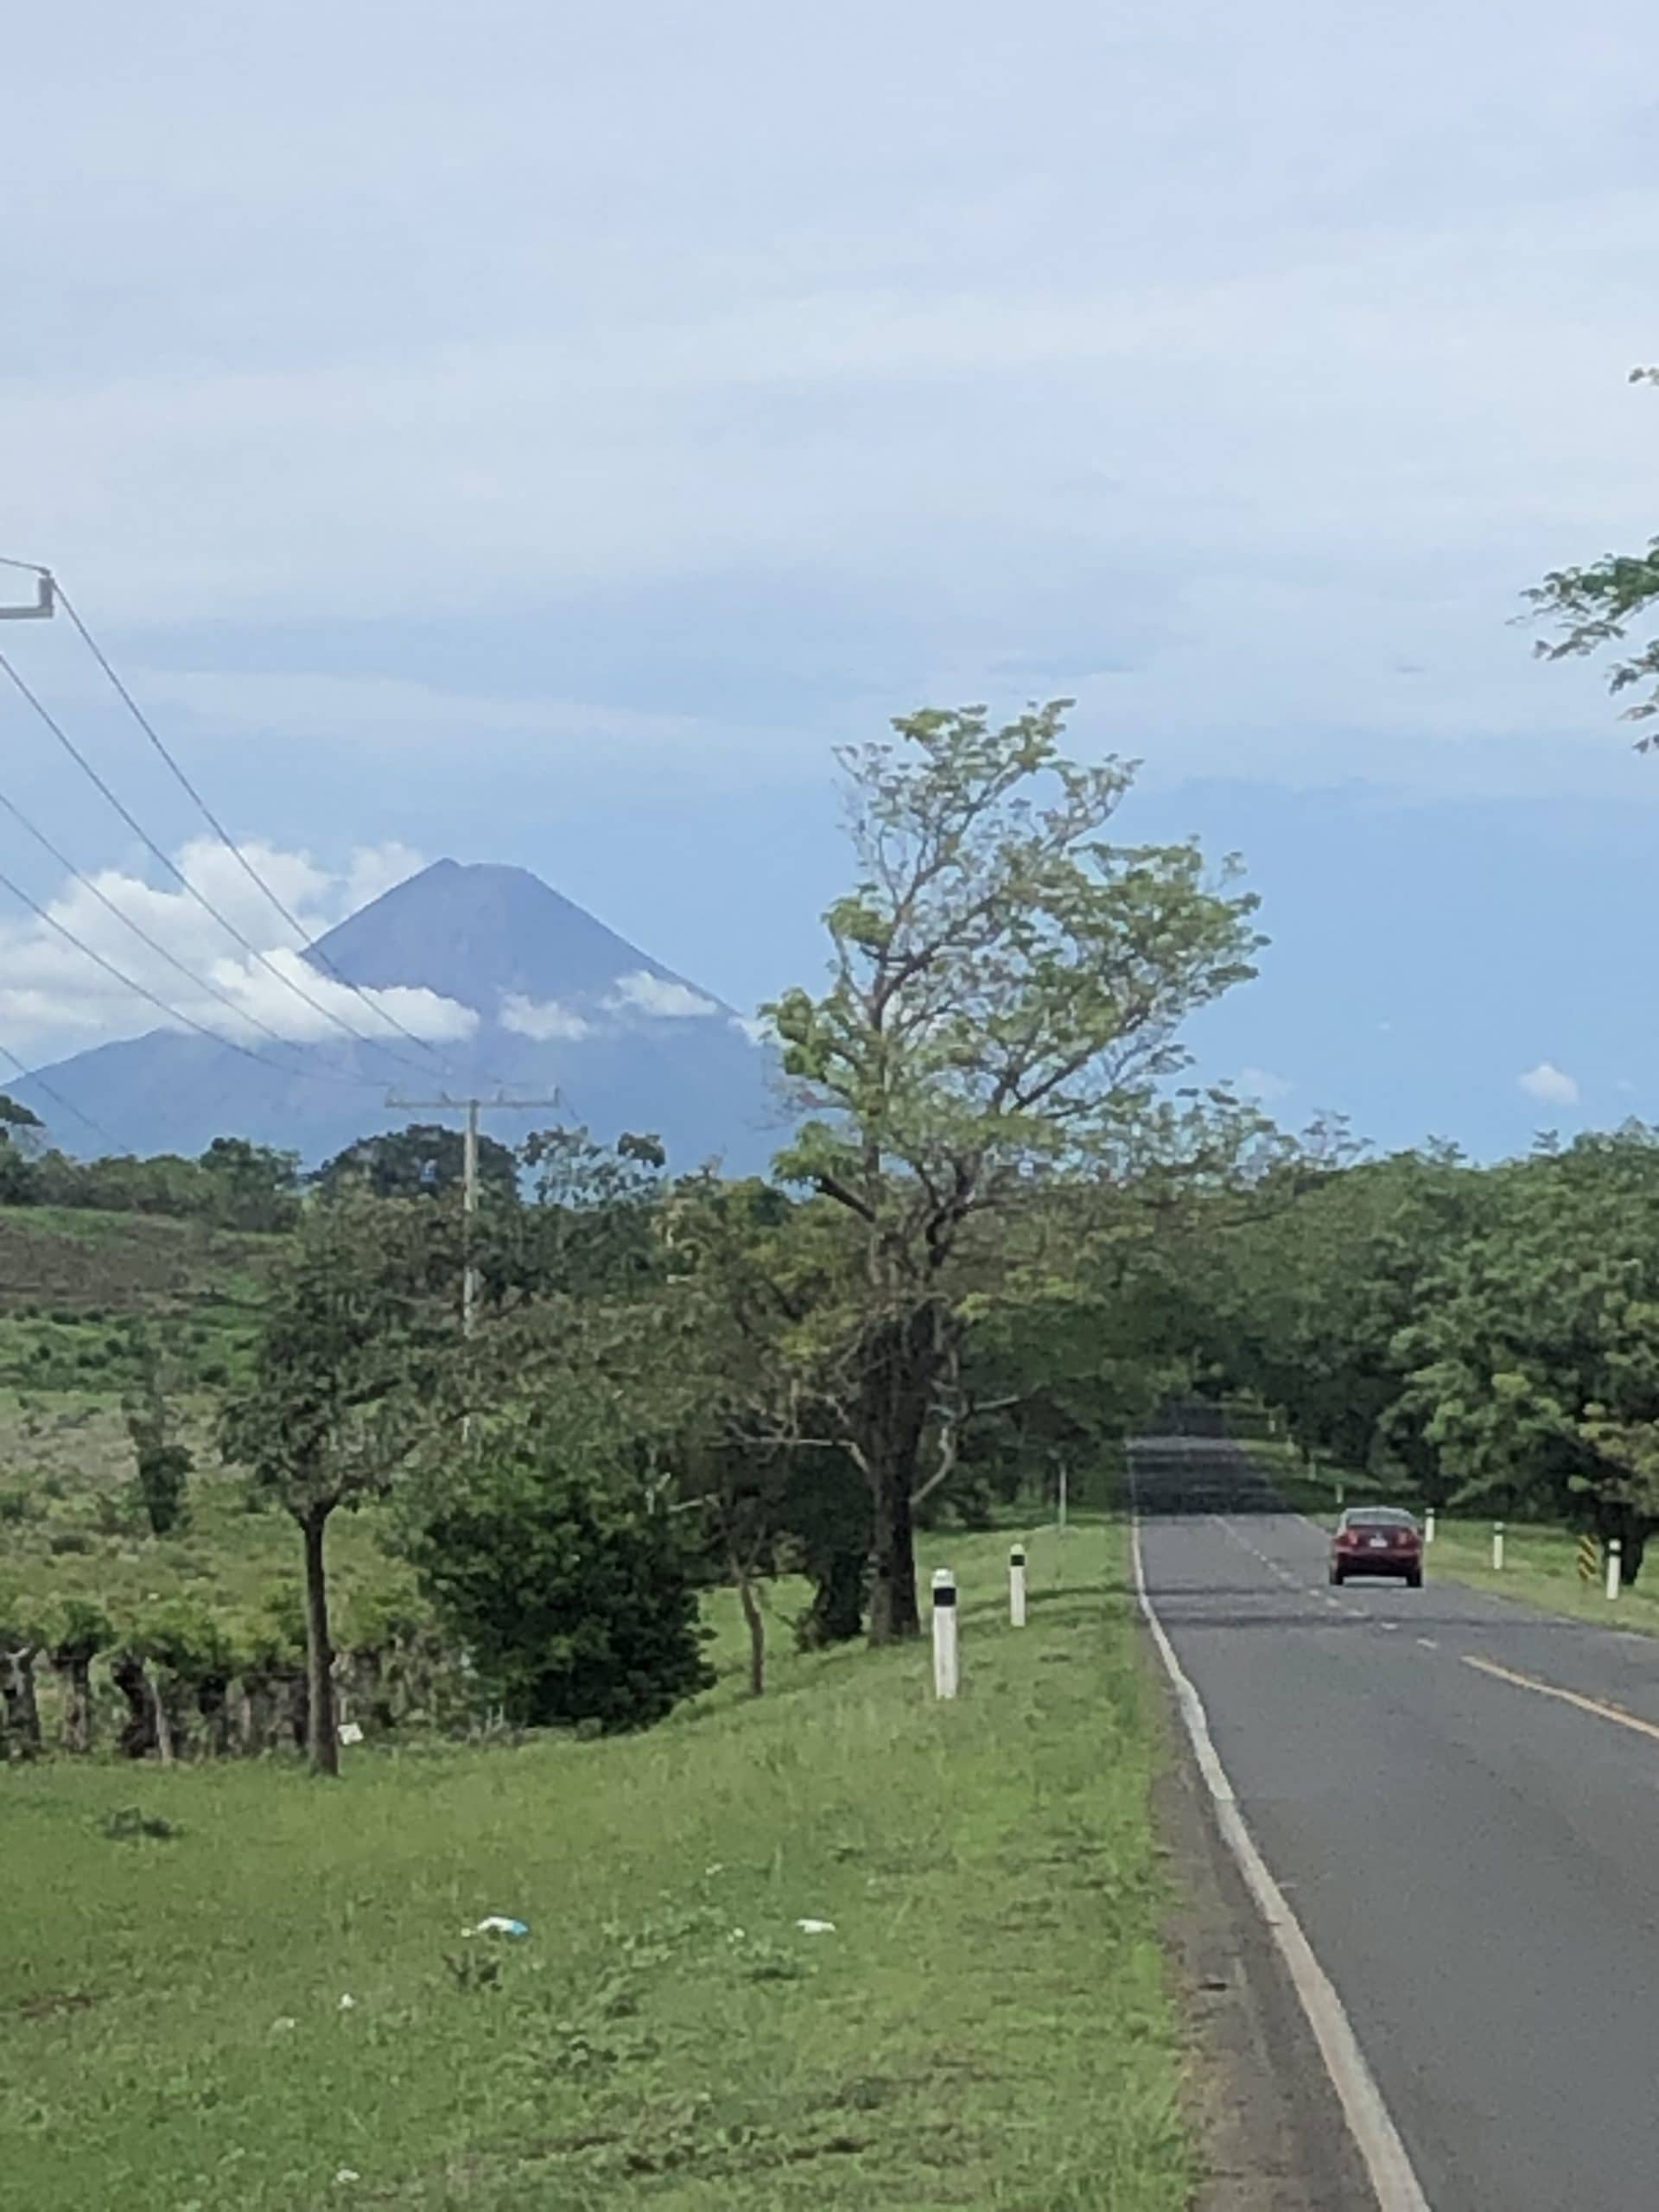 can you visit nicaragua from costa rica